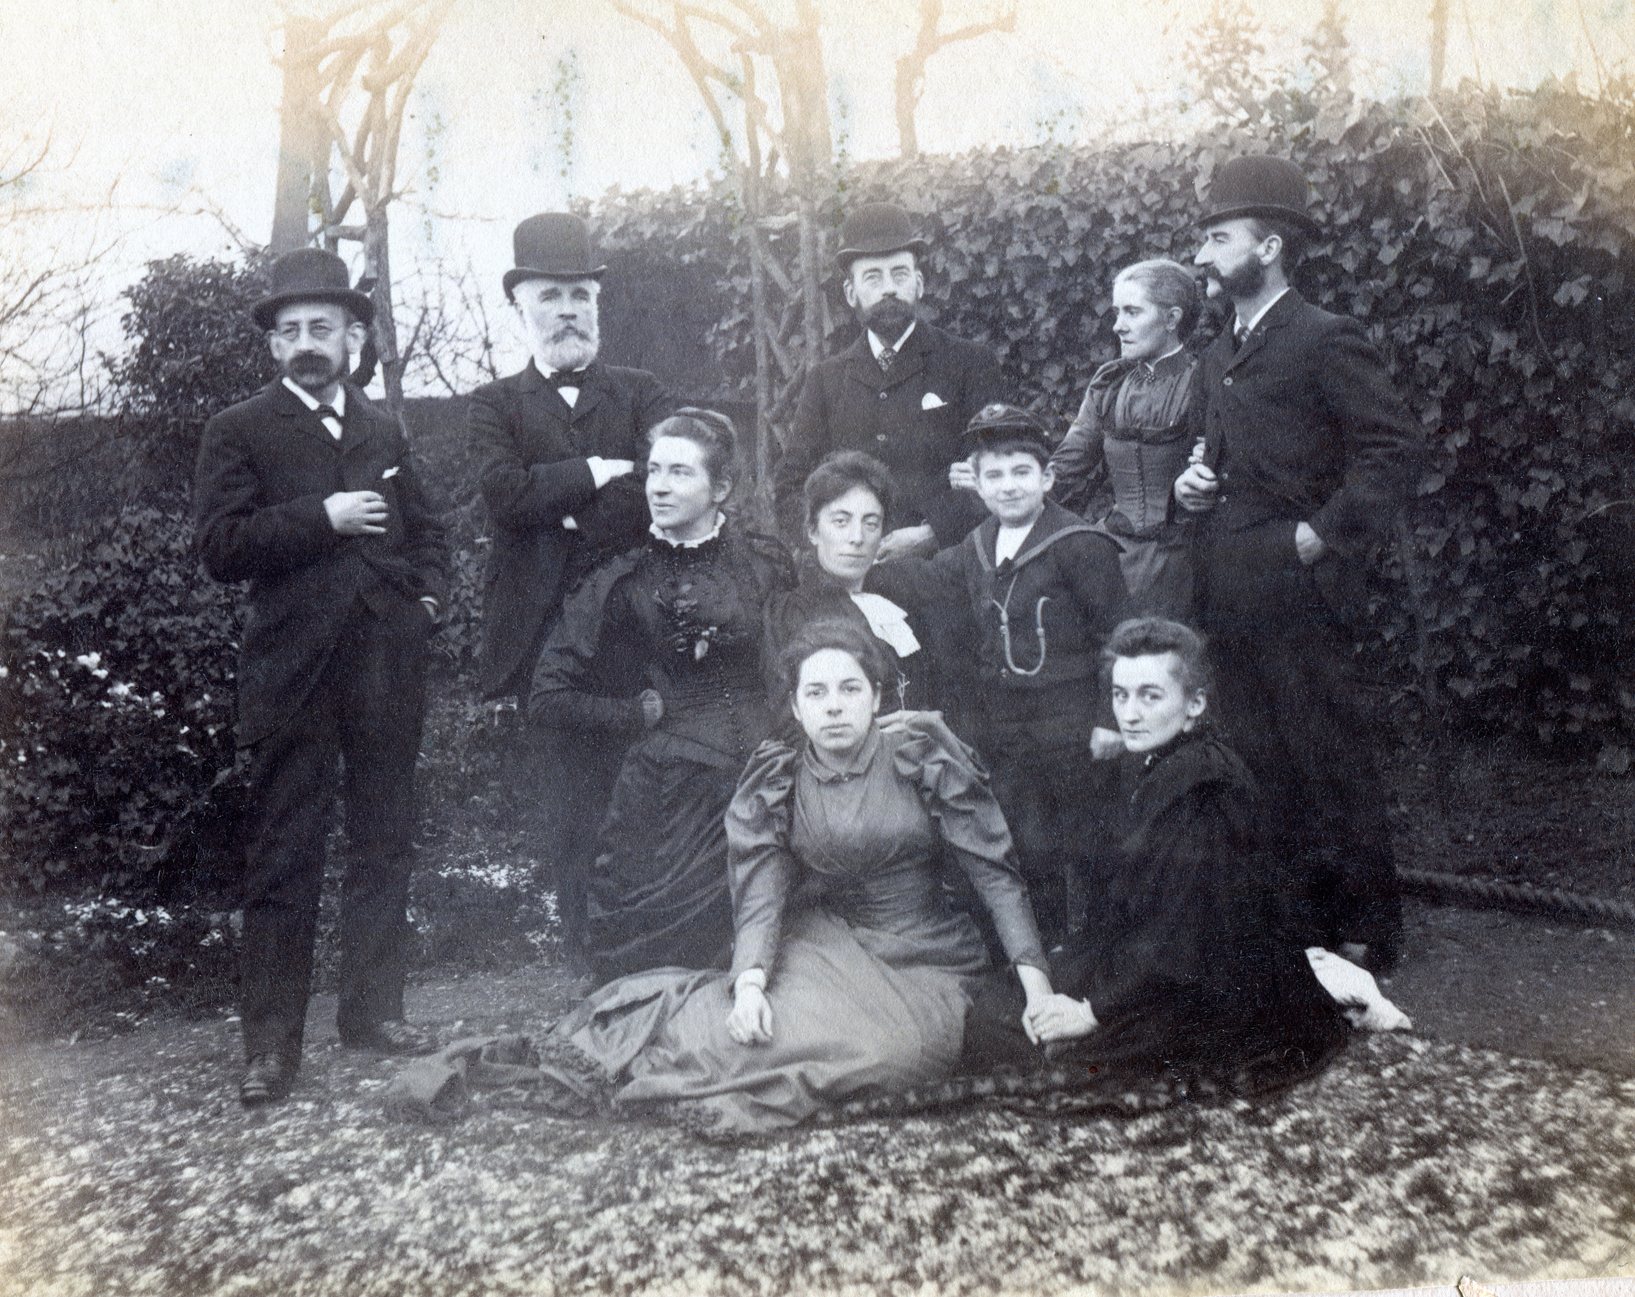 Left to right: (back) Fred Enock, Henry Dell (brother-in-law), Robinson Enock (brother), Emily Enock (Edwin's wife), Edwin Enock (brother), (middle) Jennie Enock (Fred's wife), Eleanor Enock (Robinson's wife), Roy Enock (Edwin and Emily's son) (front) Amy Dell (Henry Dell's daughter), Jane Enock (Fred's nephew, Guy Enock's wife) c1891